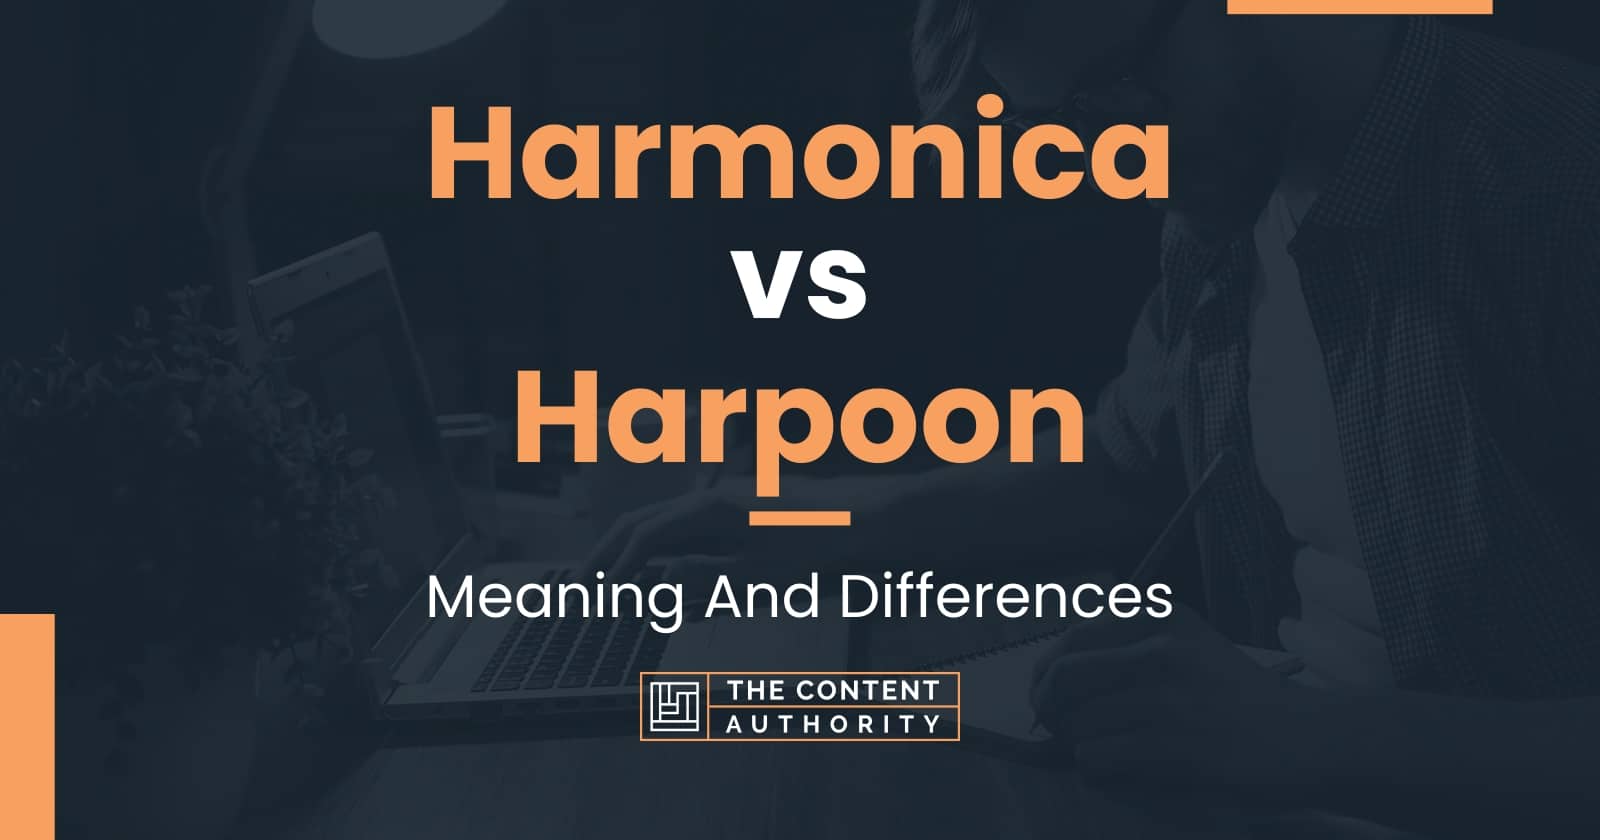 Harmonica vs Harpoon: Meaning And Differences